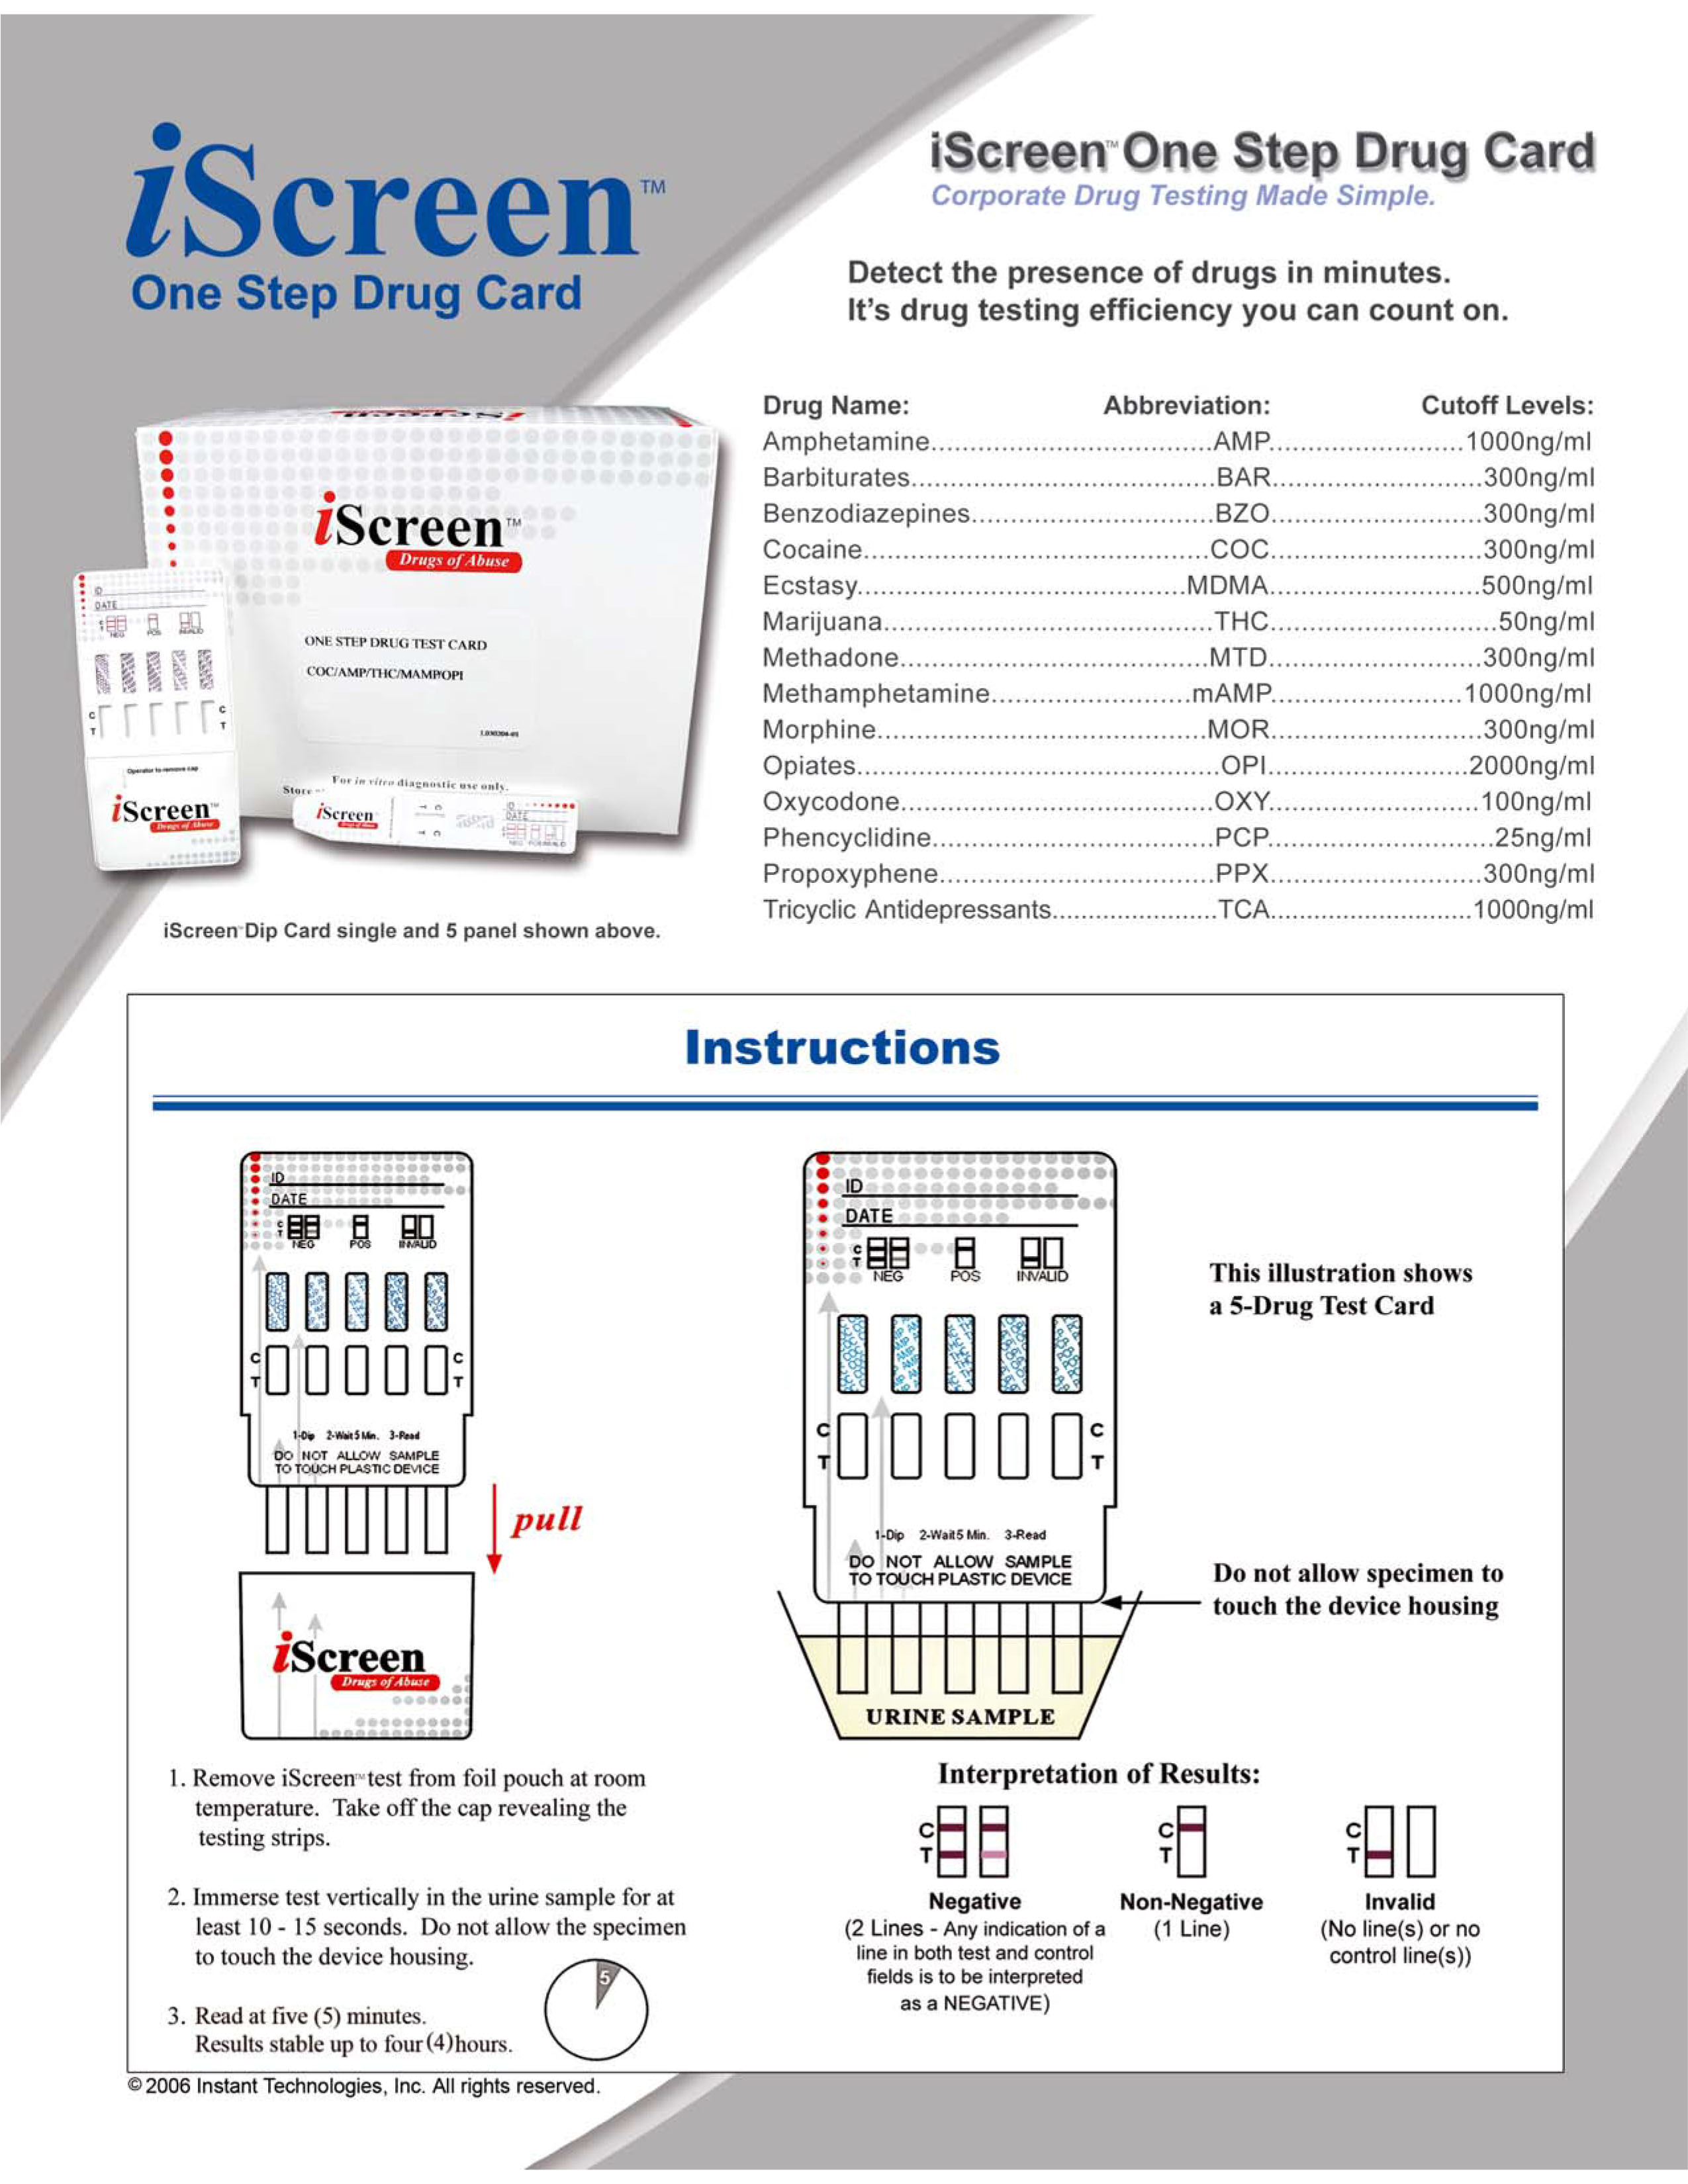 iScreen One Step Drug Card Product Specs (Page 2)